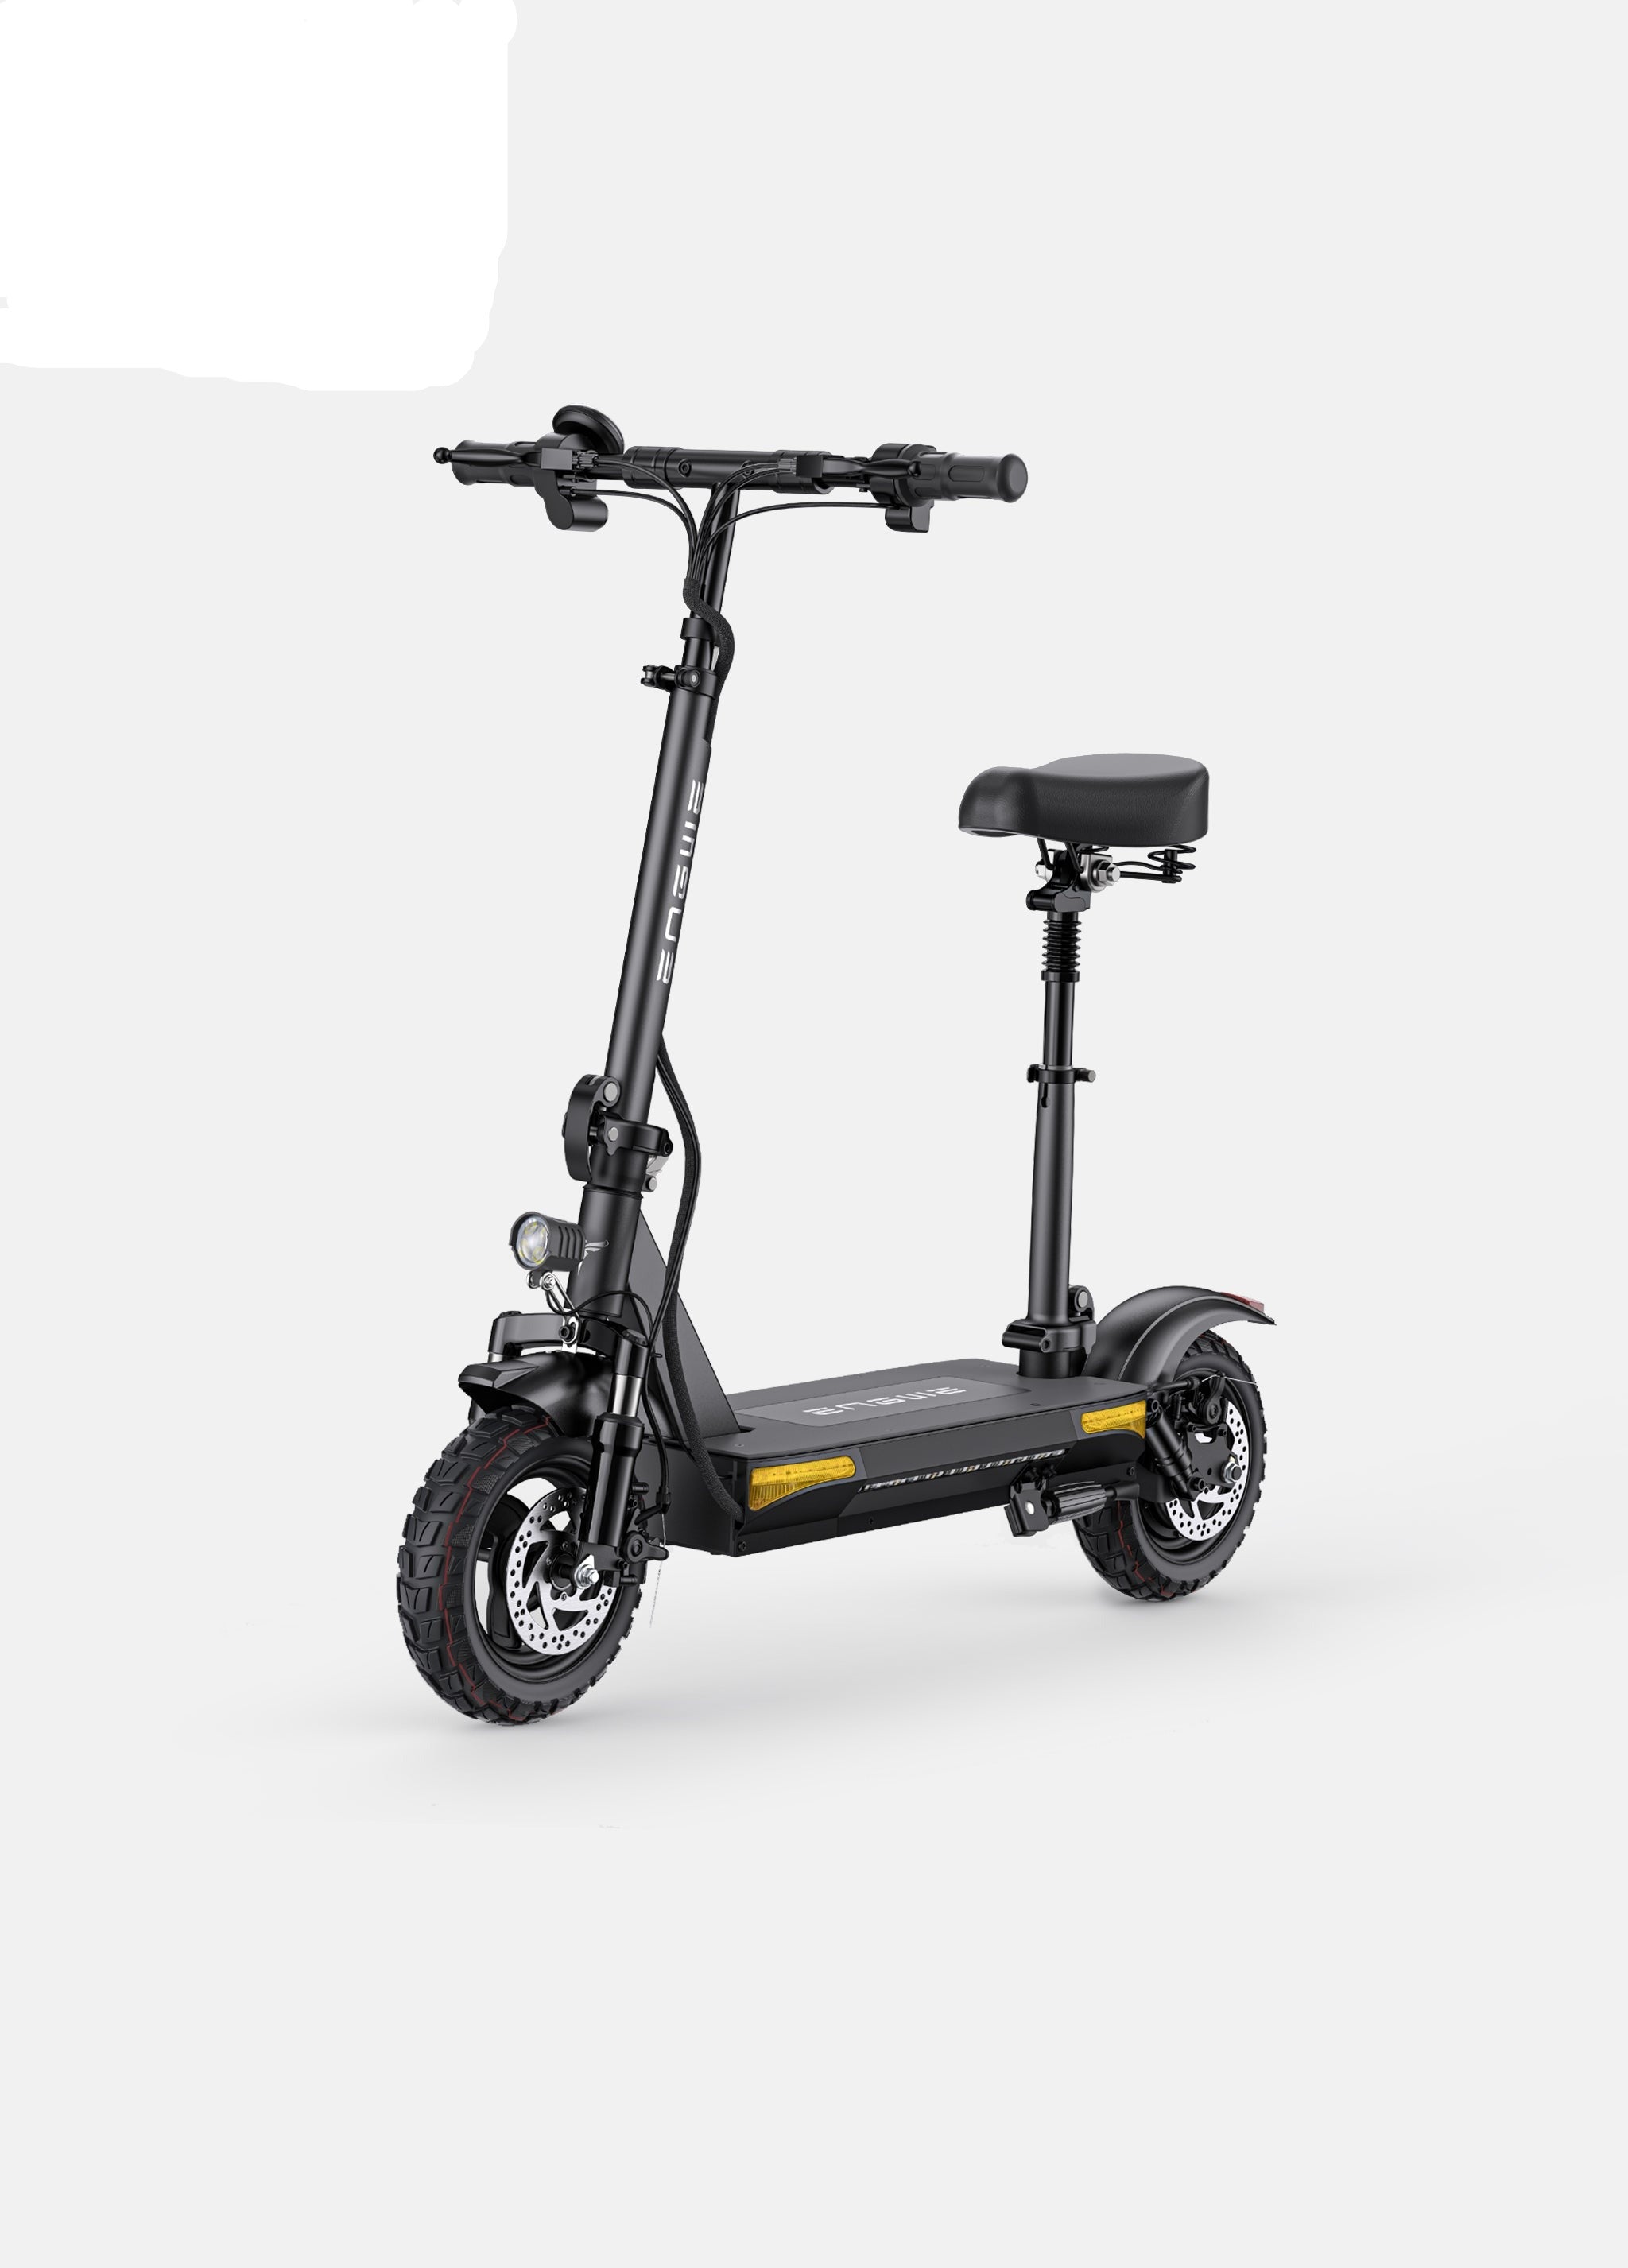 EZ-S6 iEZWAY Off Road Electric Scooter with 500W Motor,48V15.6Ah Battery, Max Speed 28 mph and 10" Tires